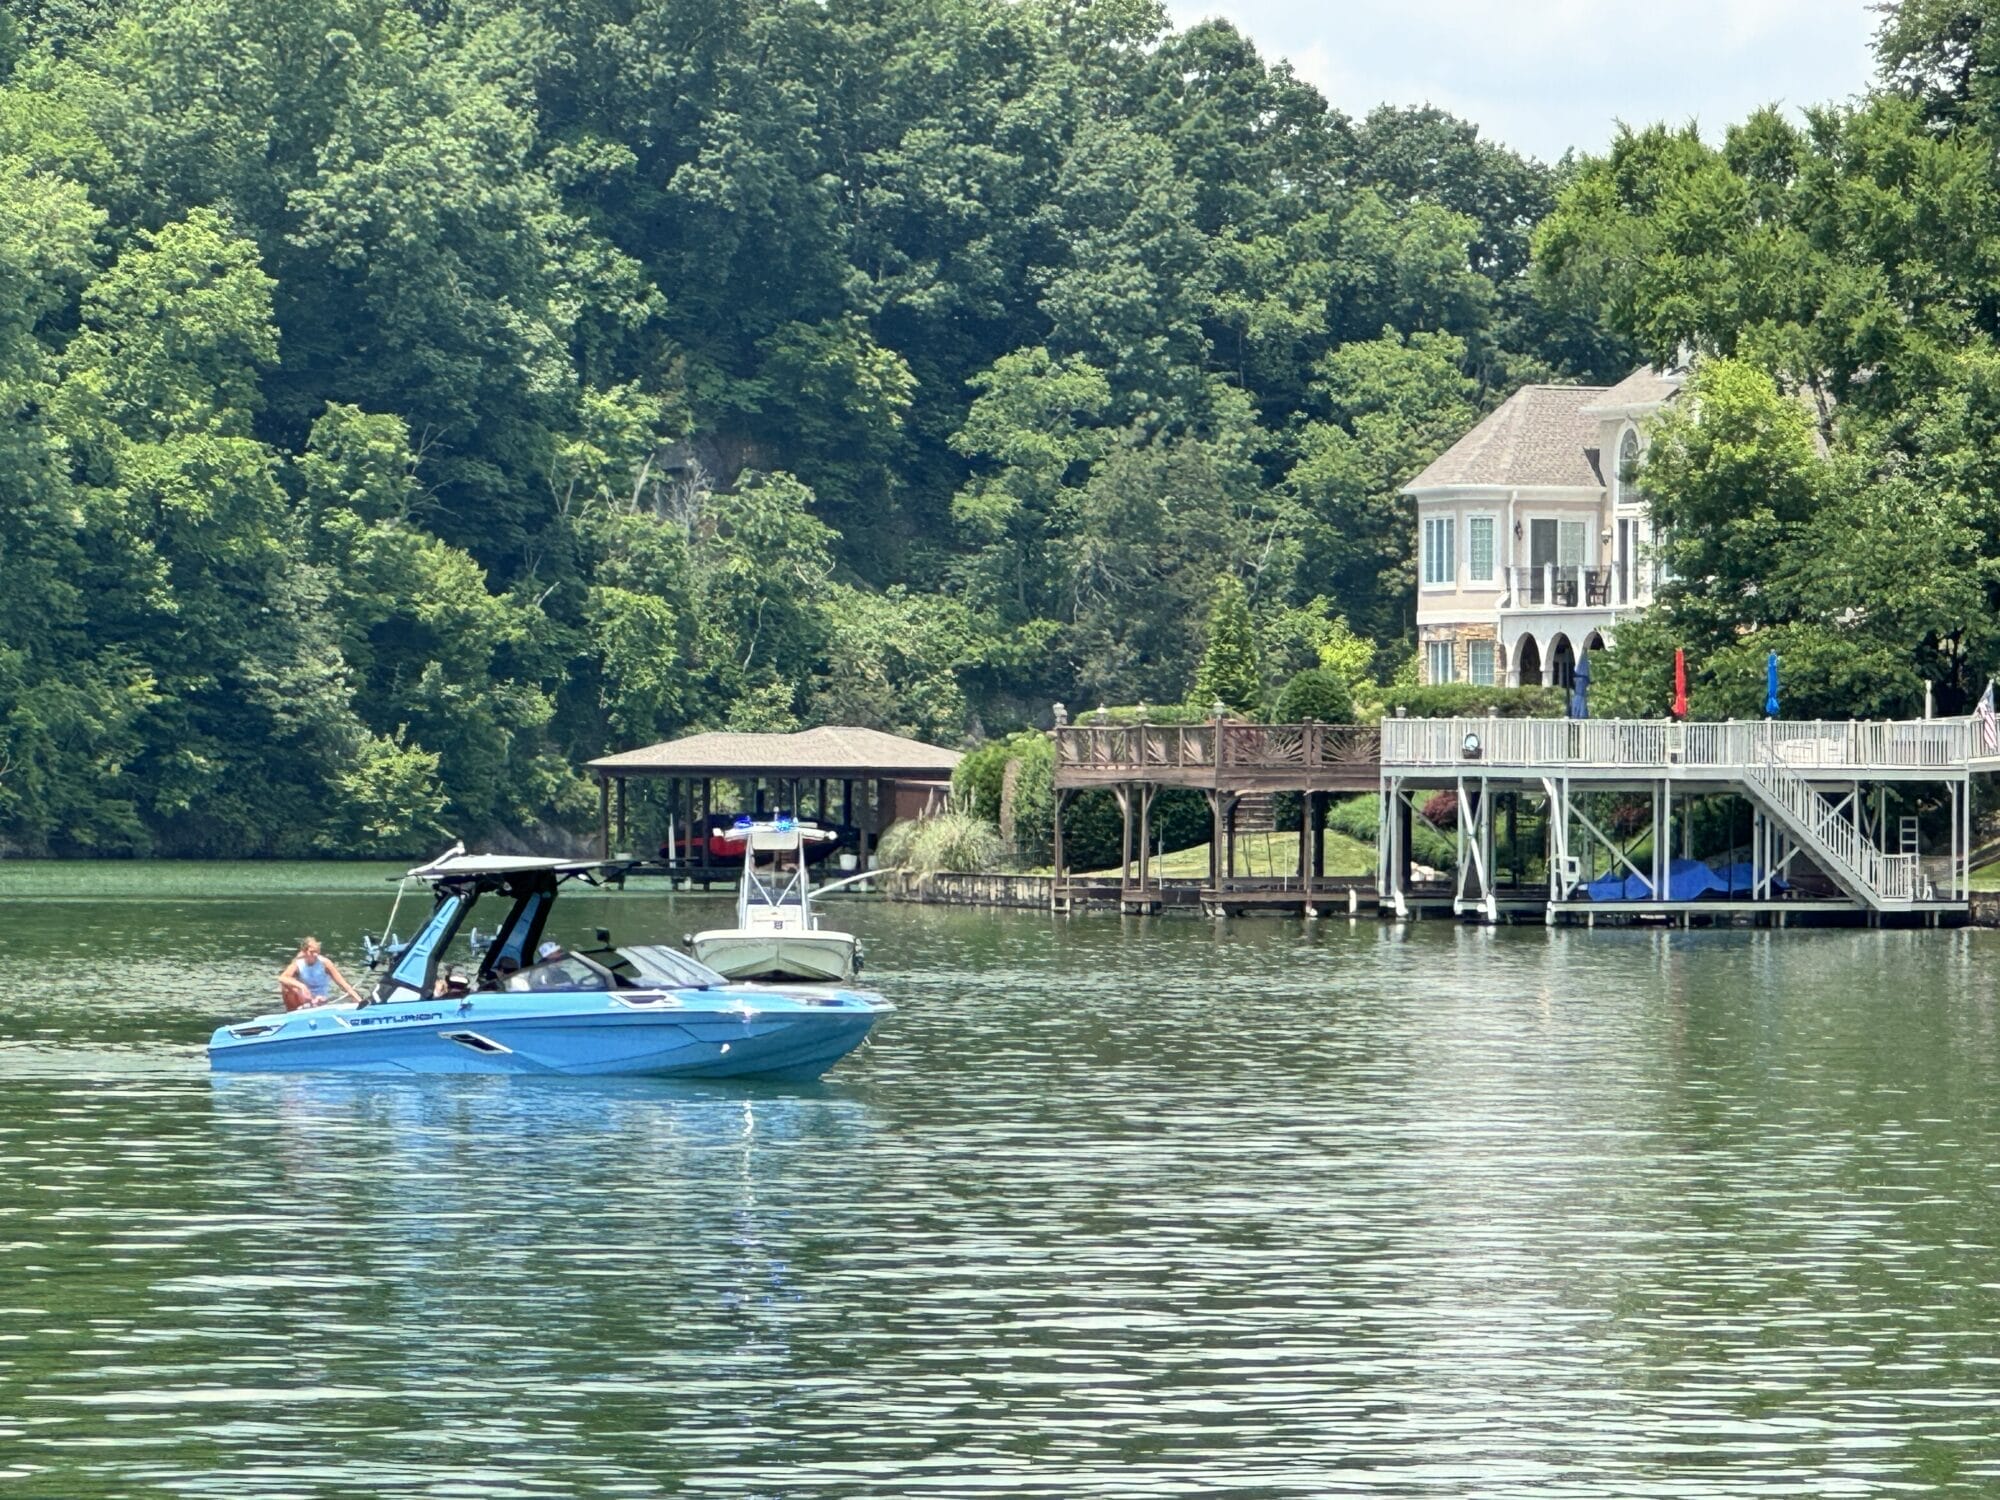 A blue motorboat with several people onboard cruises on a lake near a large lakeside house with a dock and surrounding greenery.